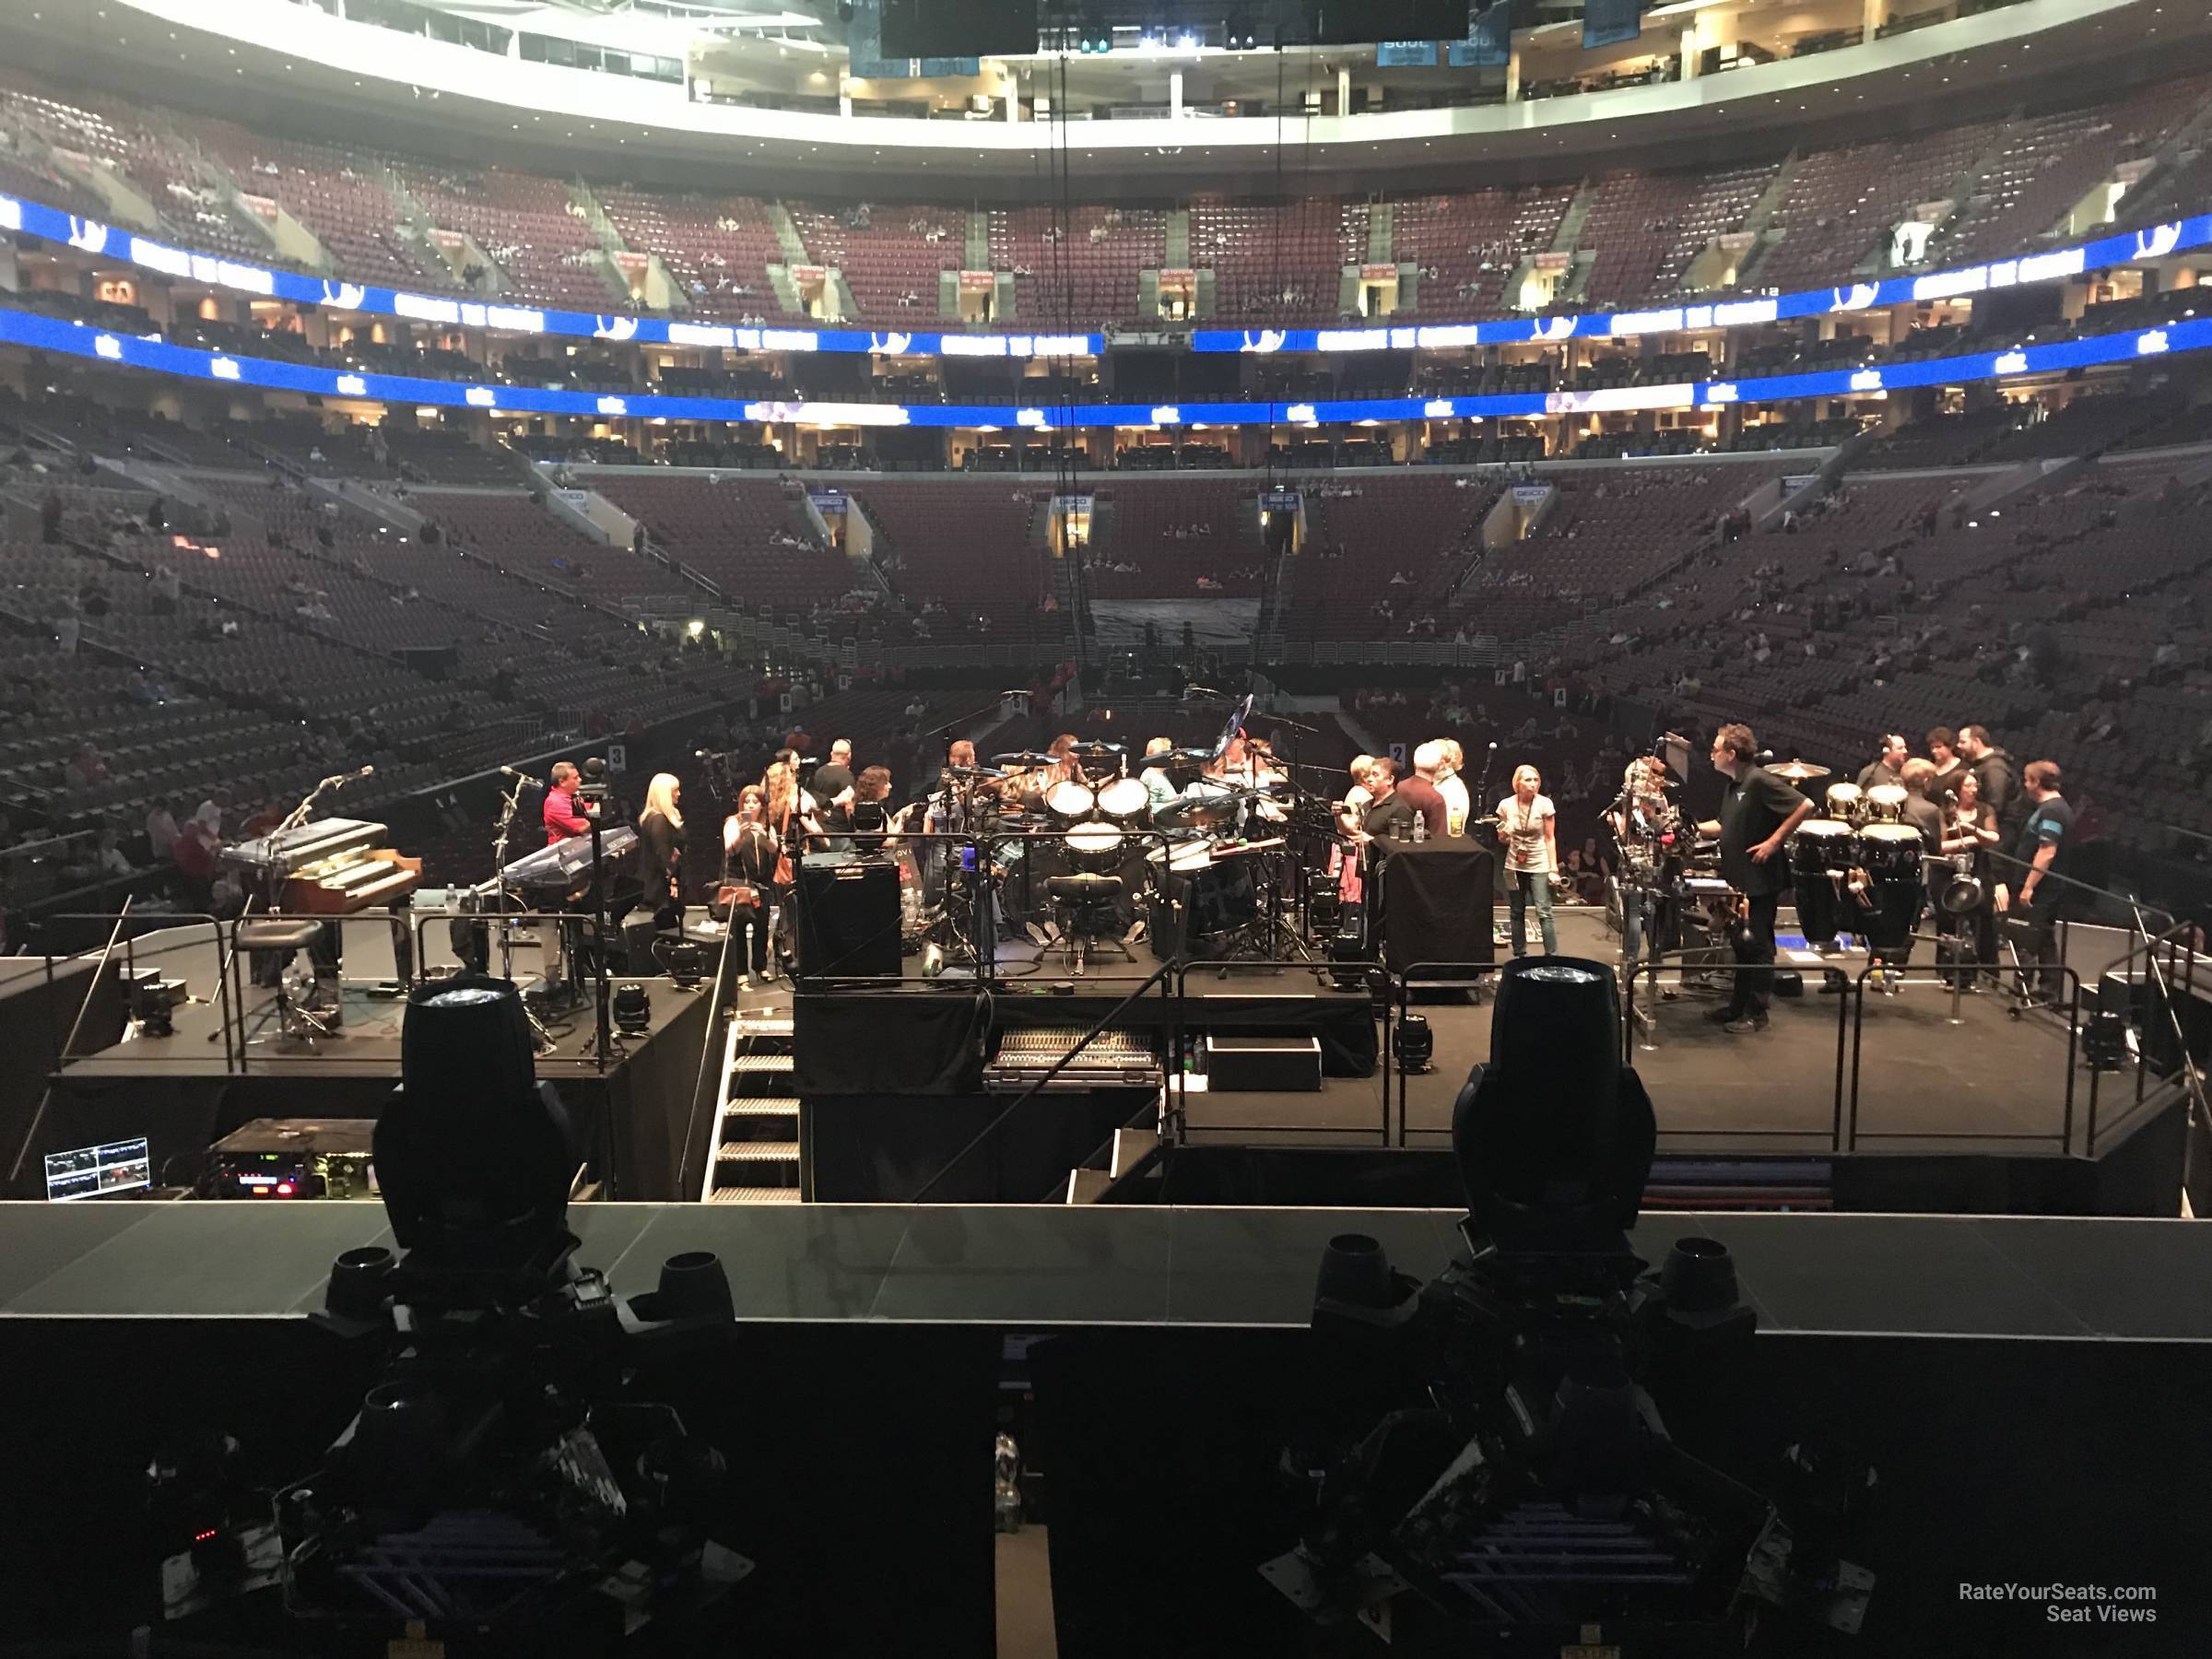 section 119, row 8 seat view  for concert - wells fargo center